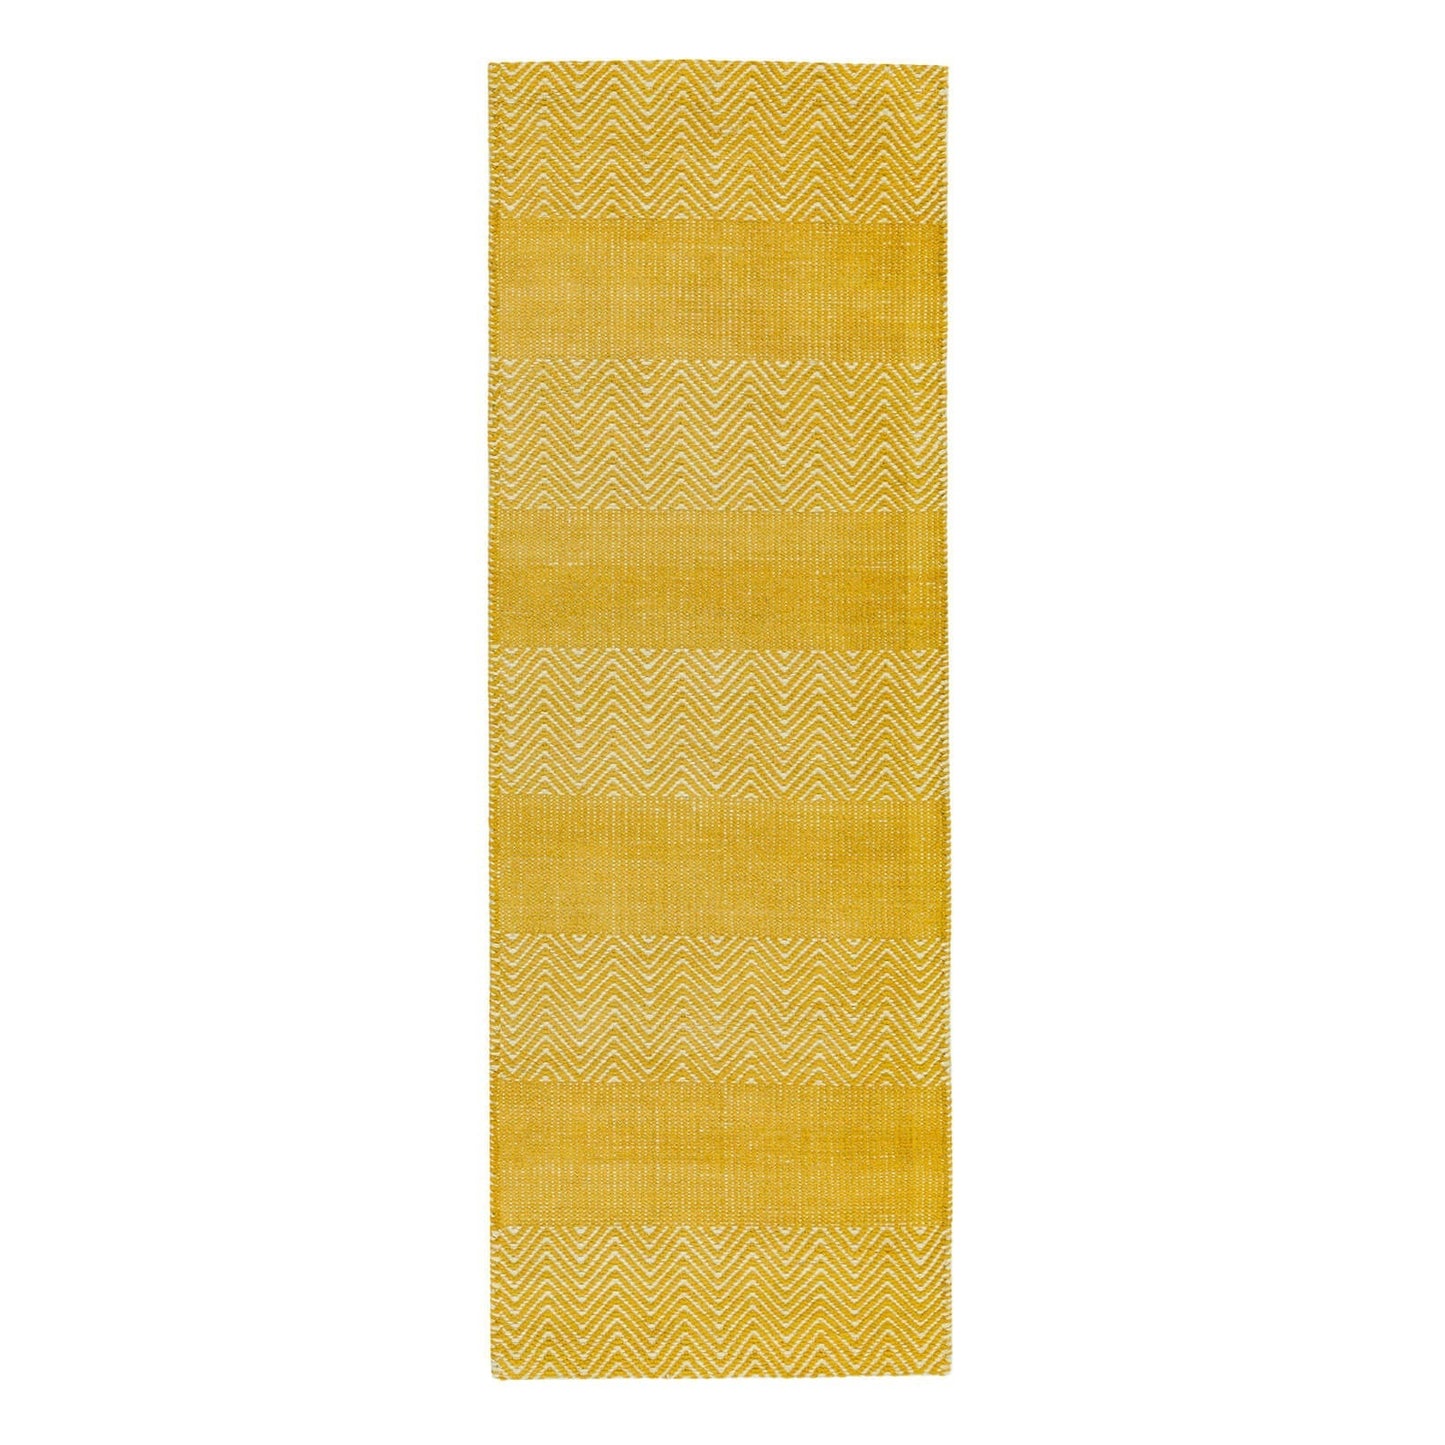 Ives Yellow Outdoor Rugs